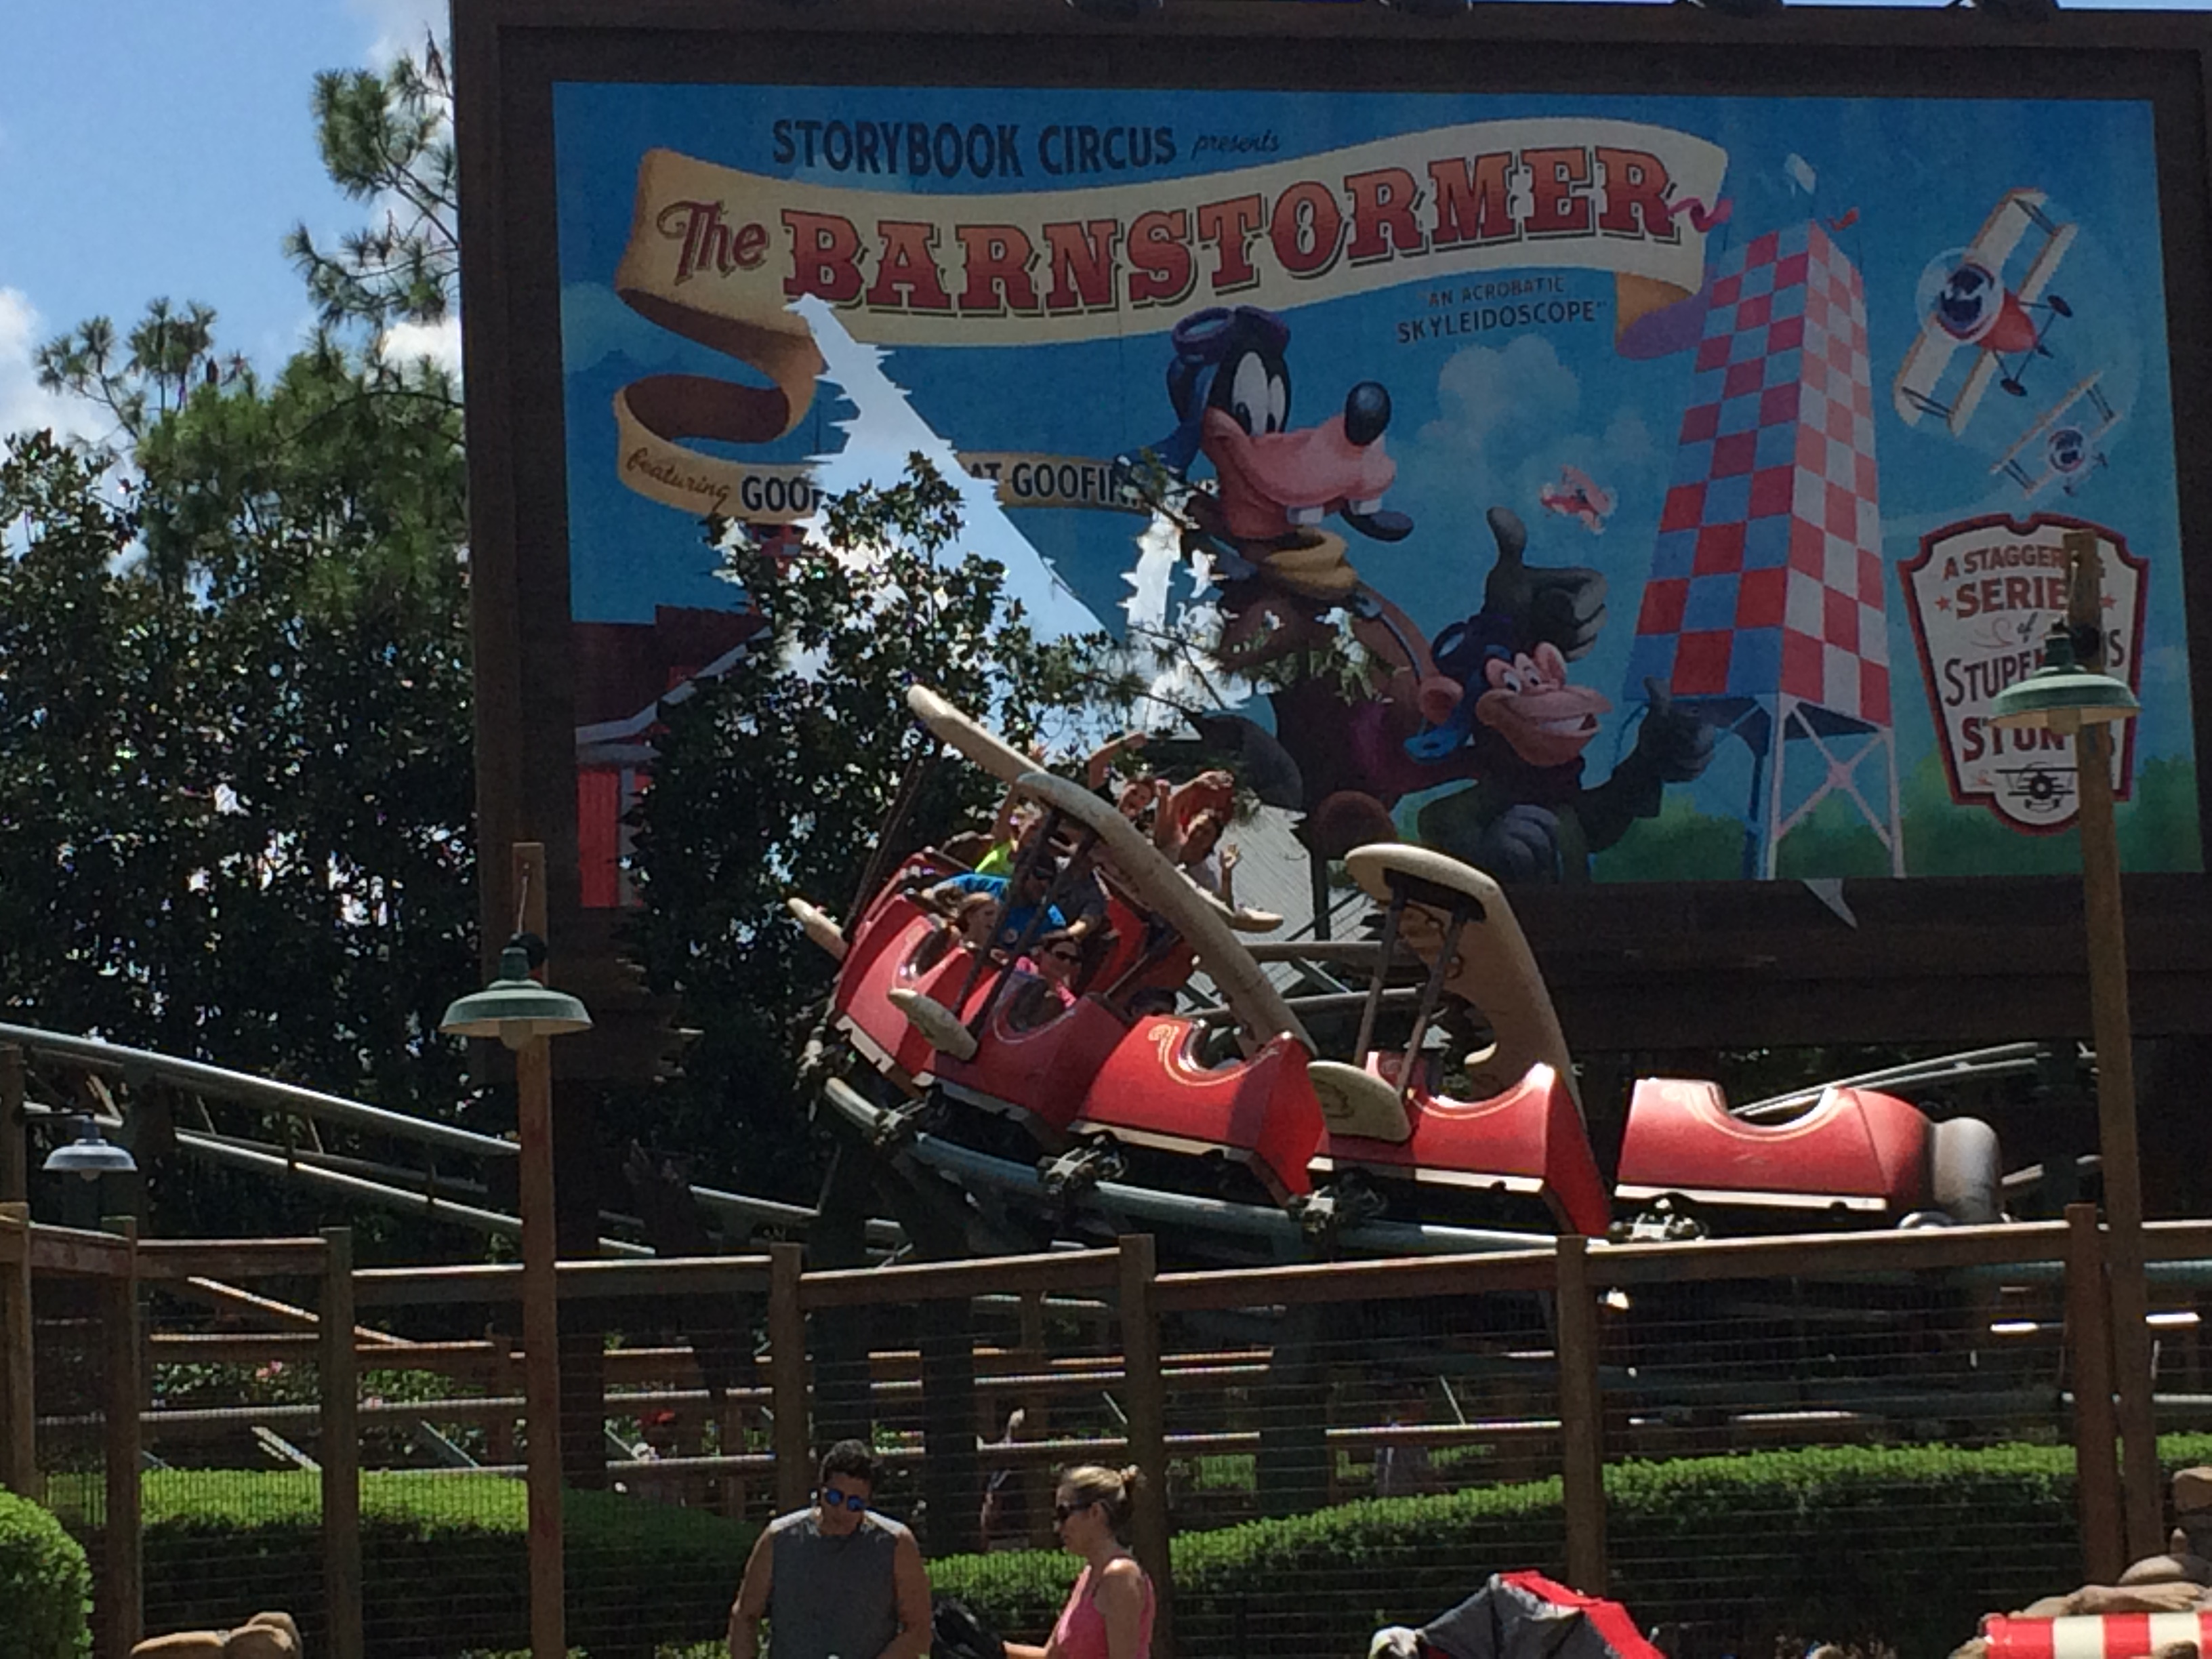 The Barnstormer Featuring Goofy as the Great Goofini